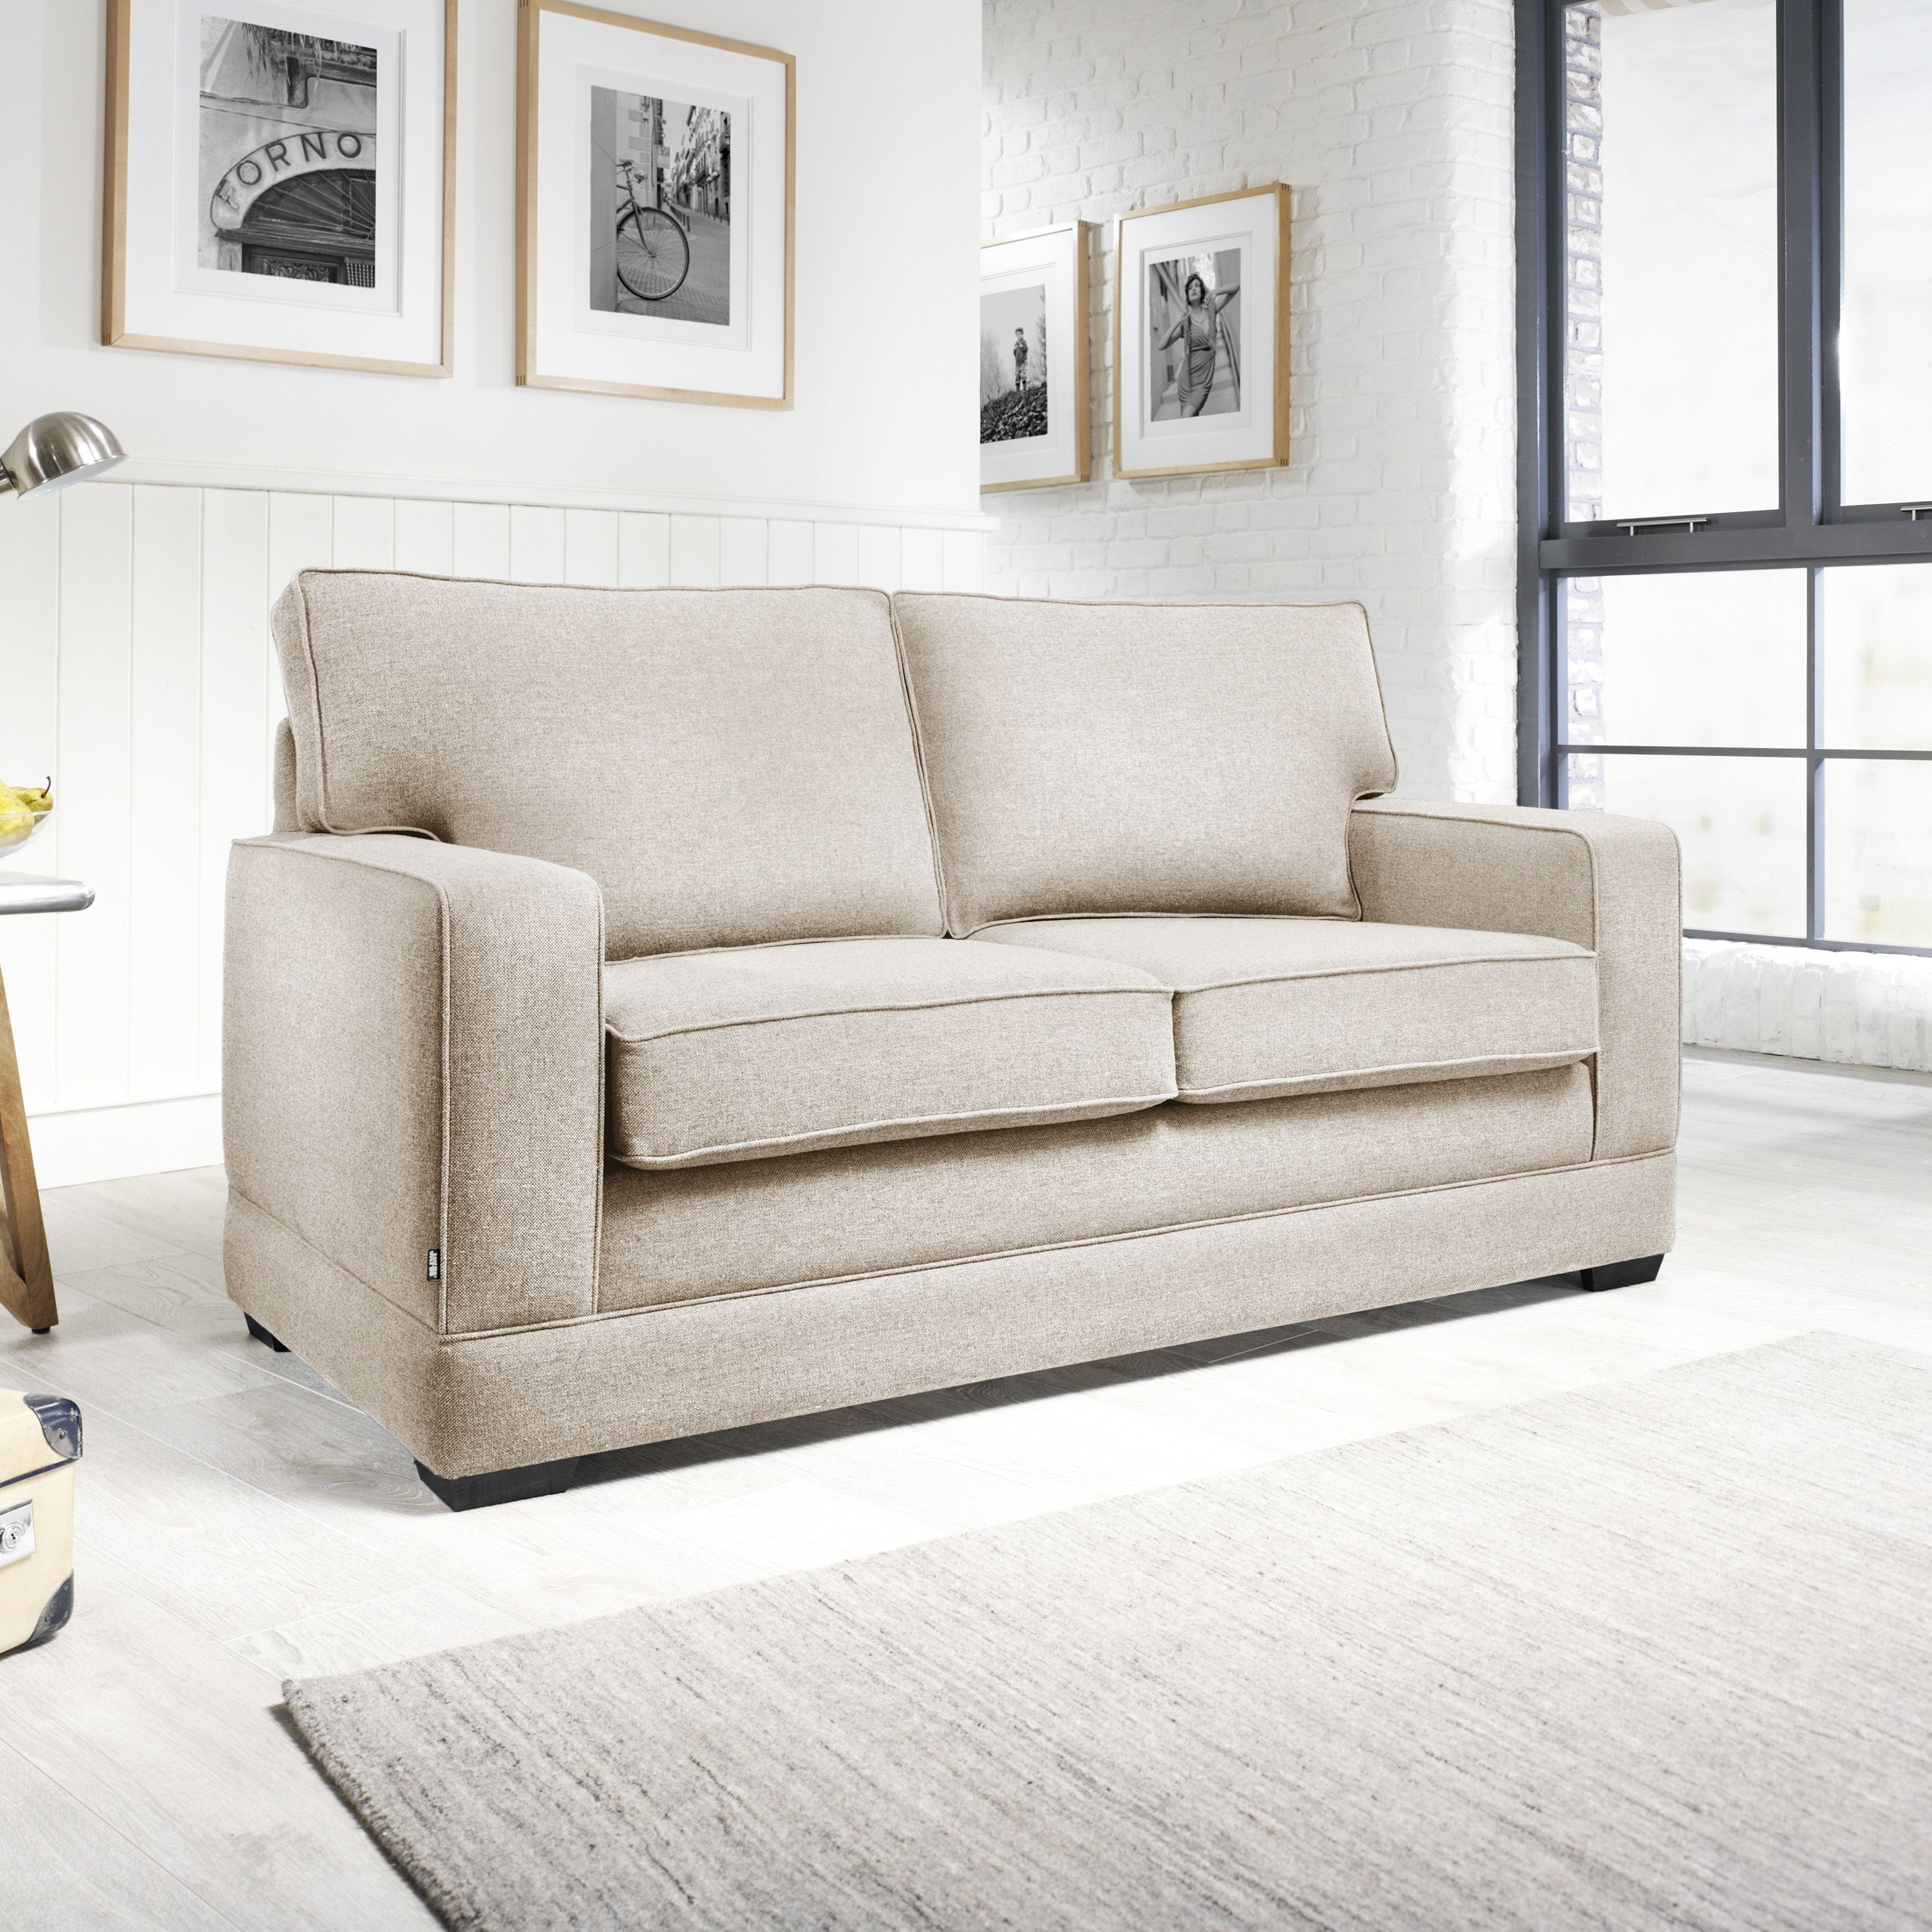 Jay-Be Modern Autumn 2 Seater Sofa bed